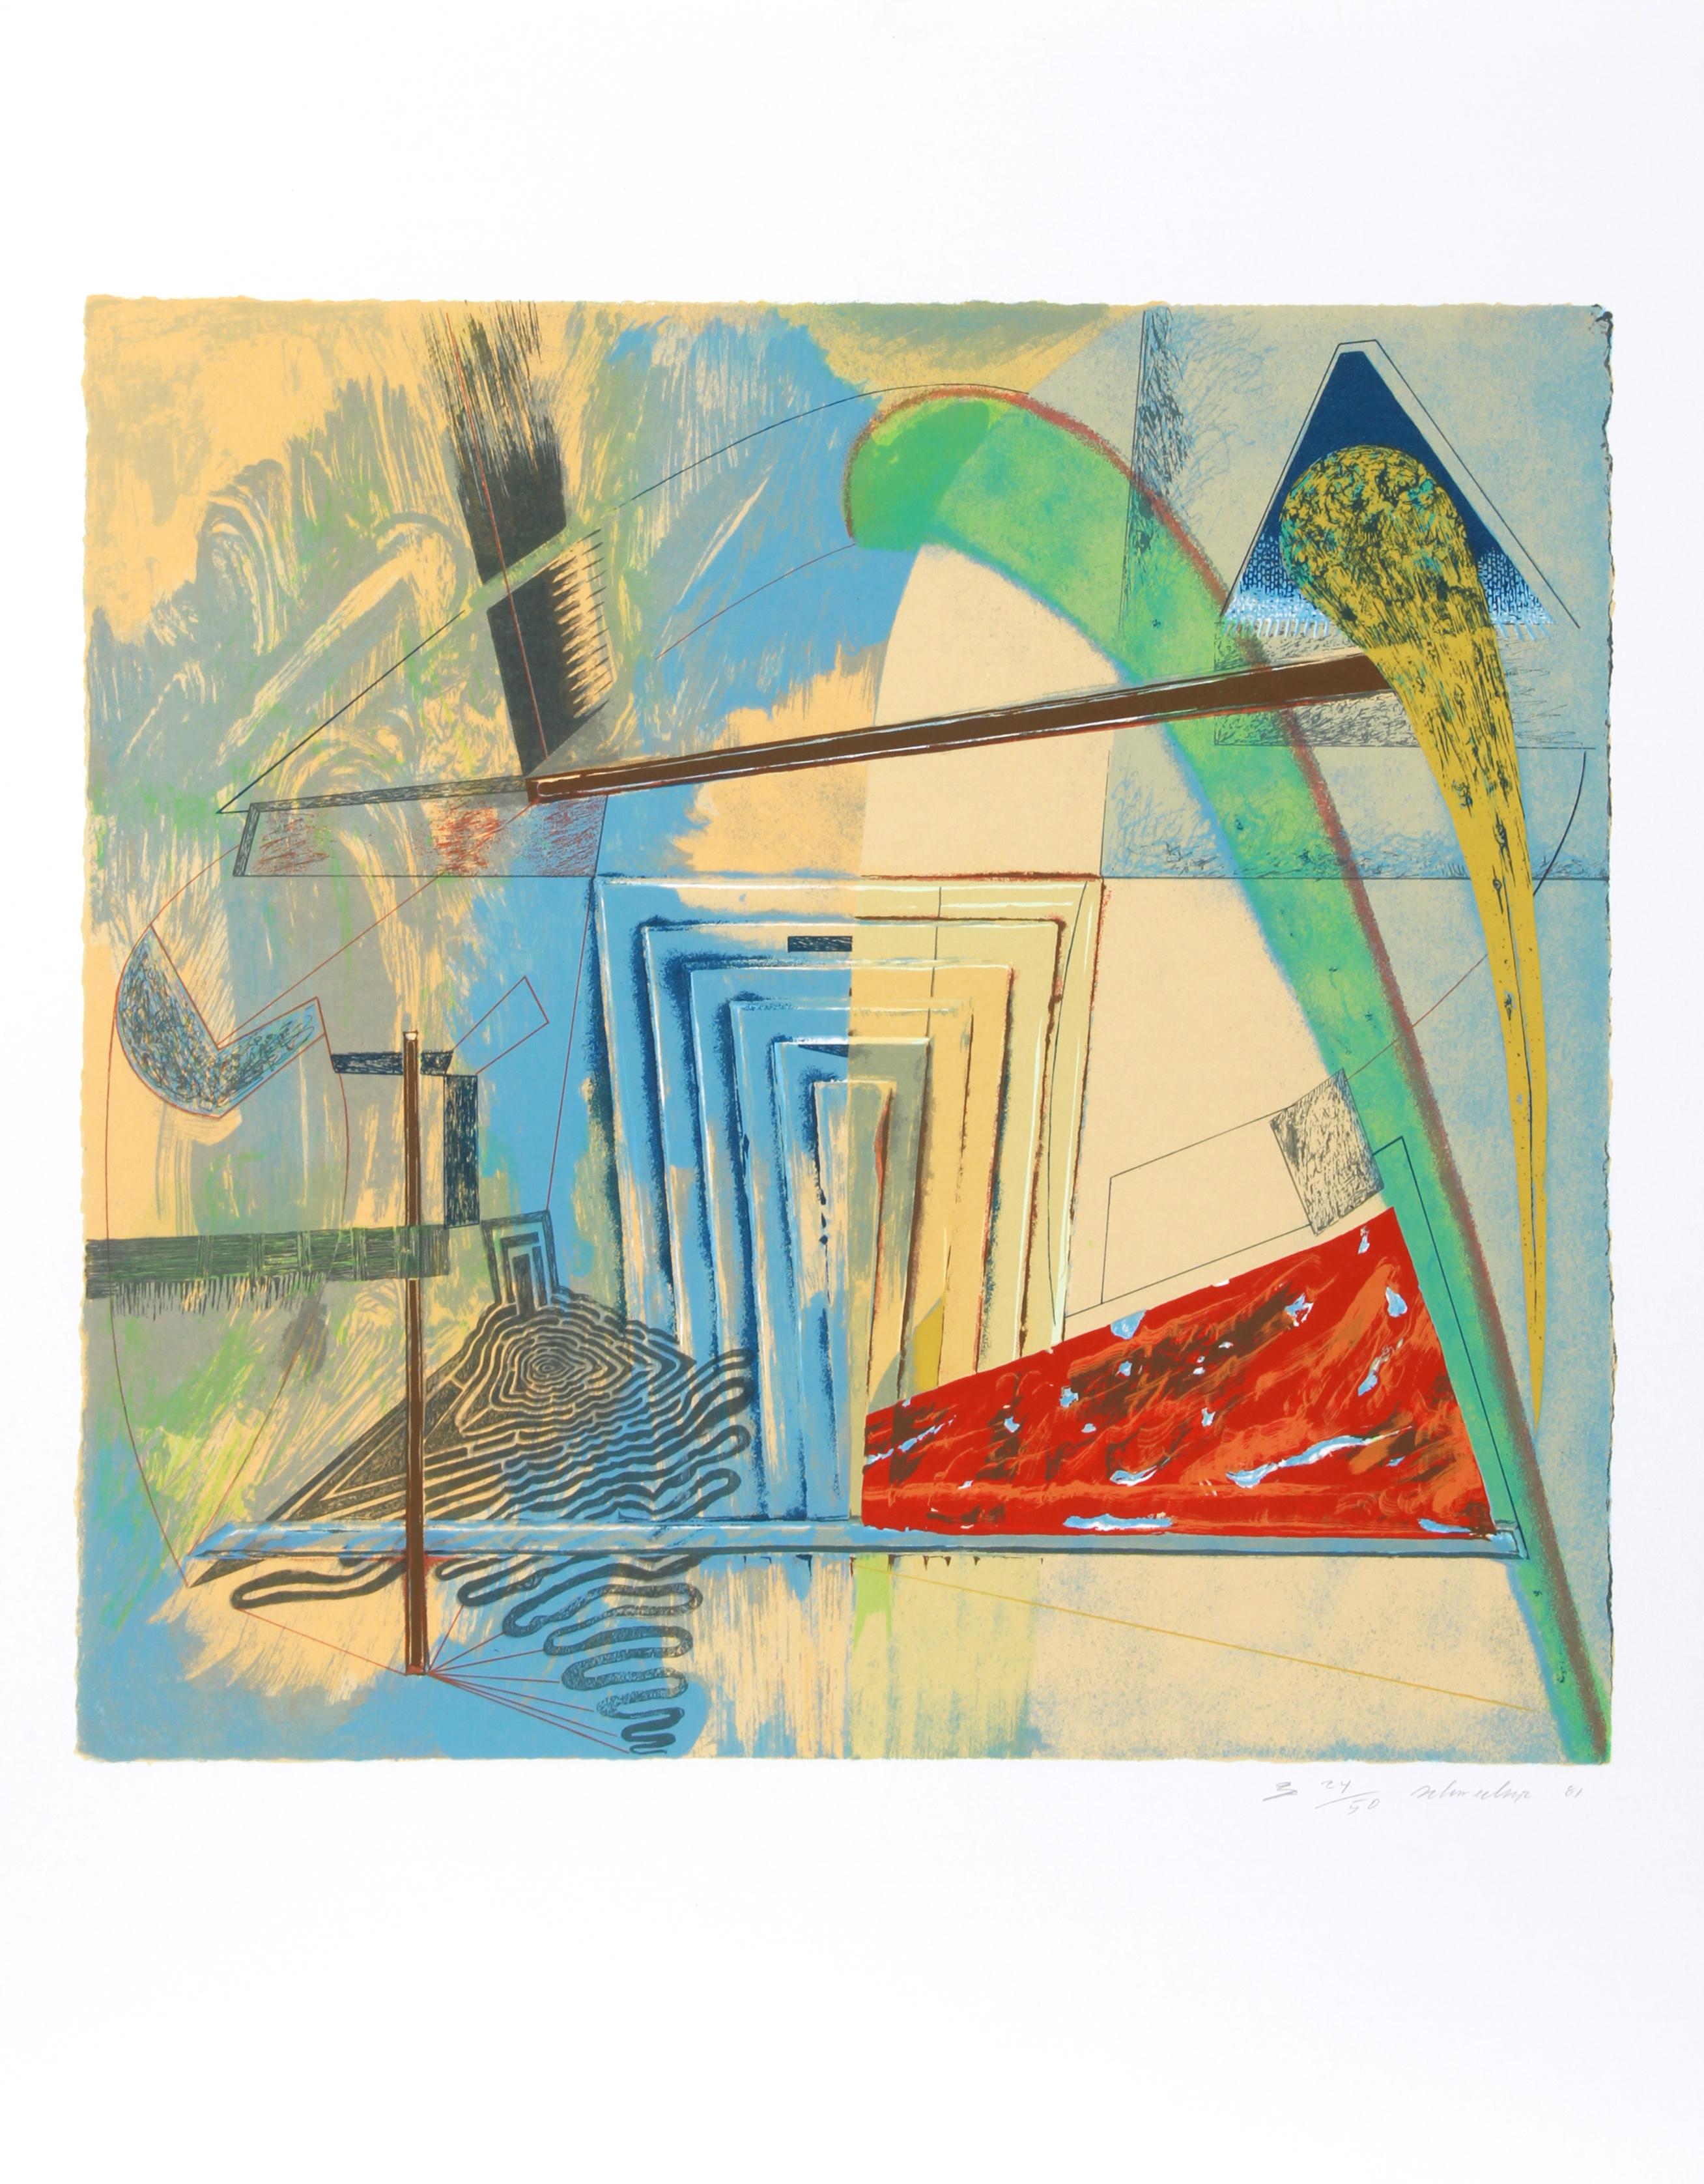 This angular print by William Schwedler is indicative of his geometric, abstract manner of composing forms and shapes in his compositions. 

Bridge the Gap
Artist:  William Schwedler, American (1942 - 1982)
Date: 1981
Screenprint, signed and